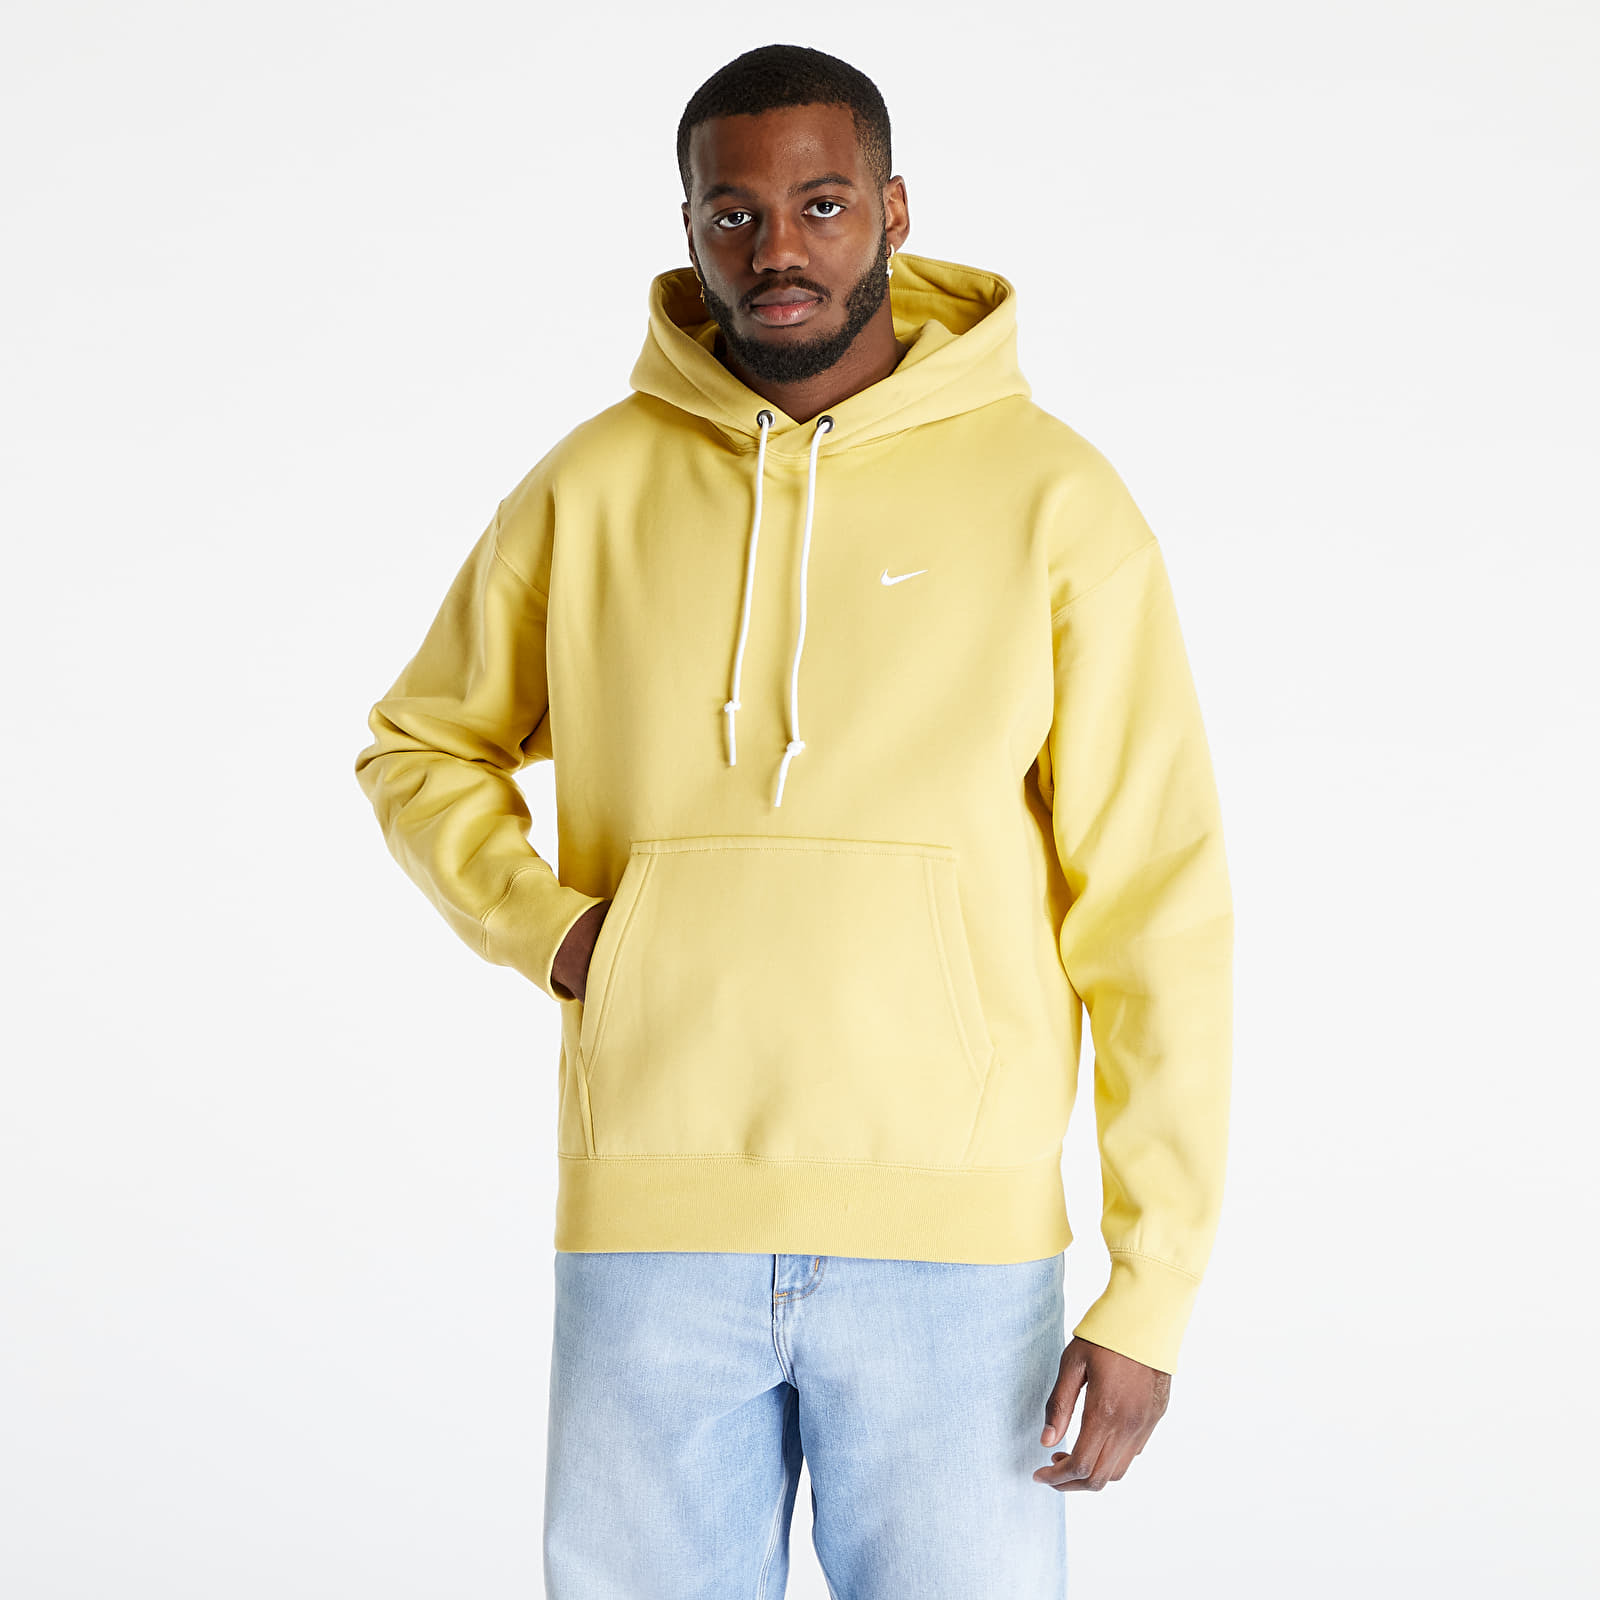 Nike - lab solo swoosh fleece pullover hoodie saturn gold/ white